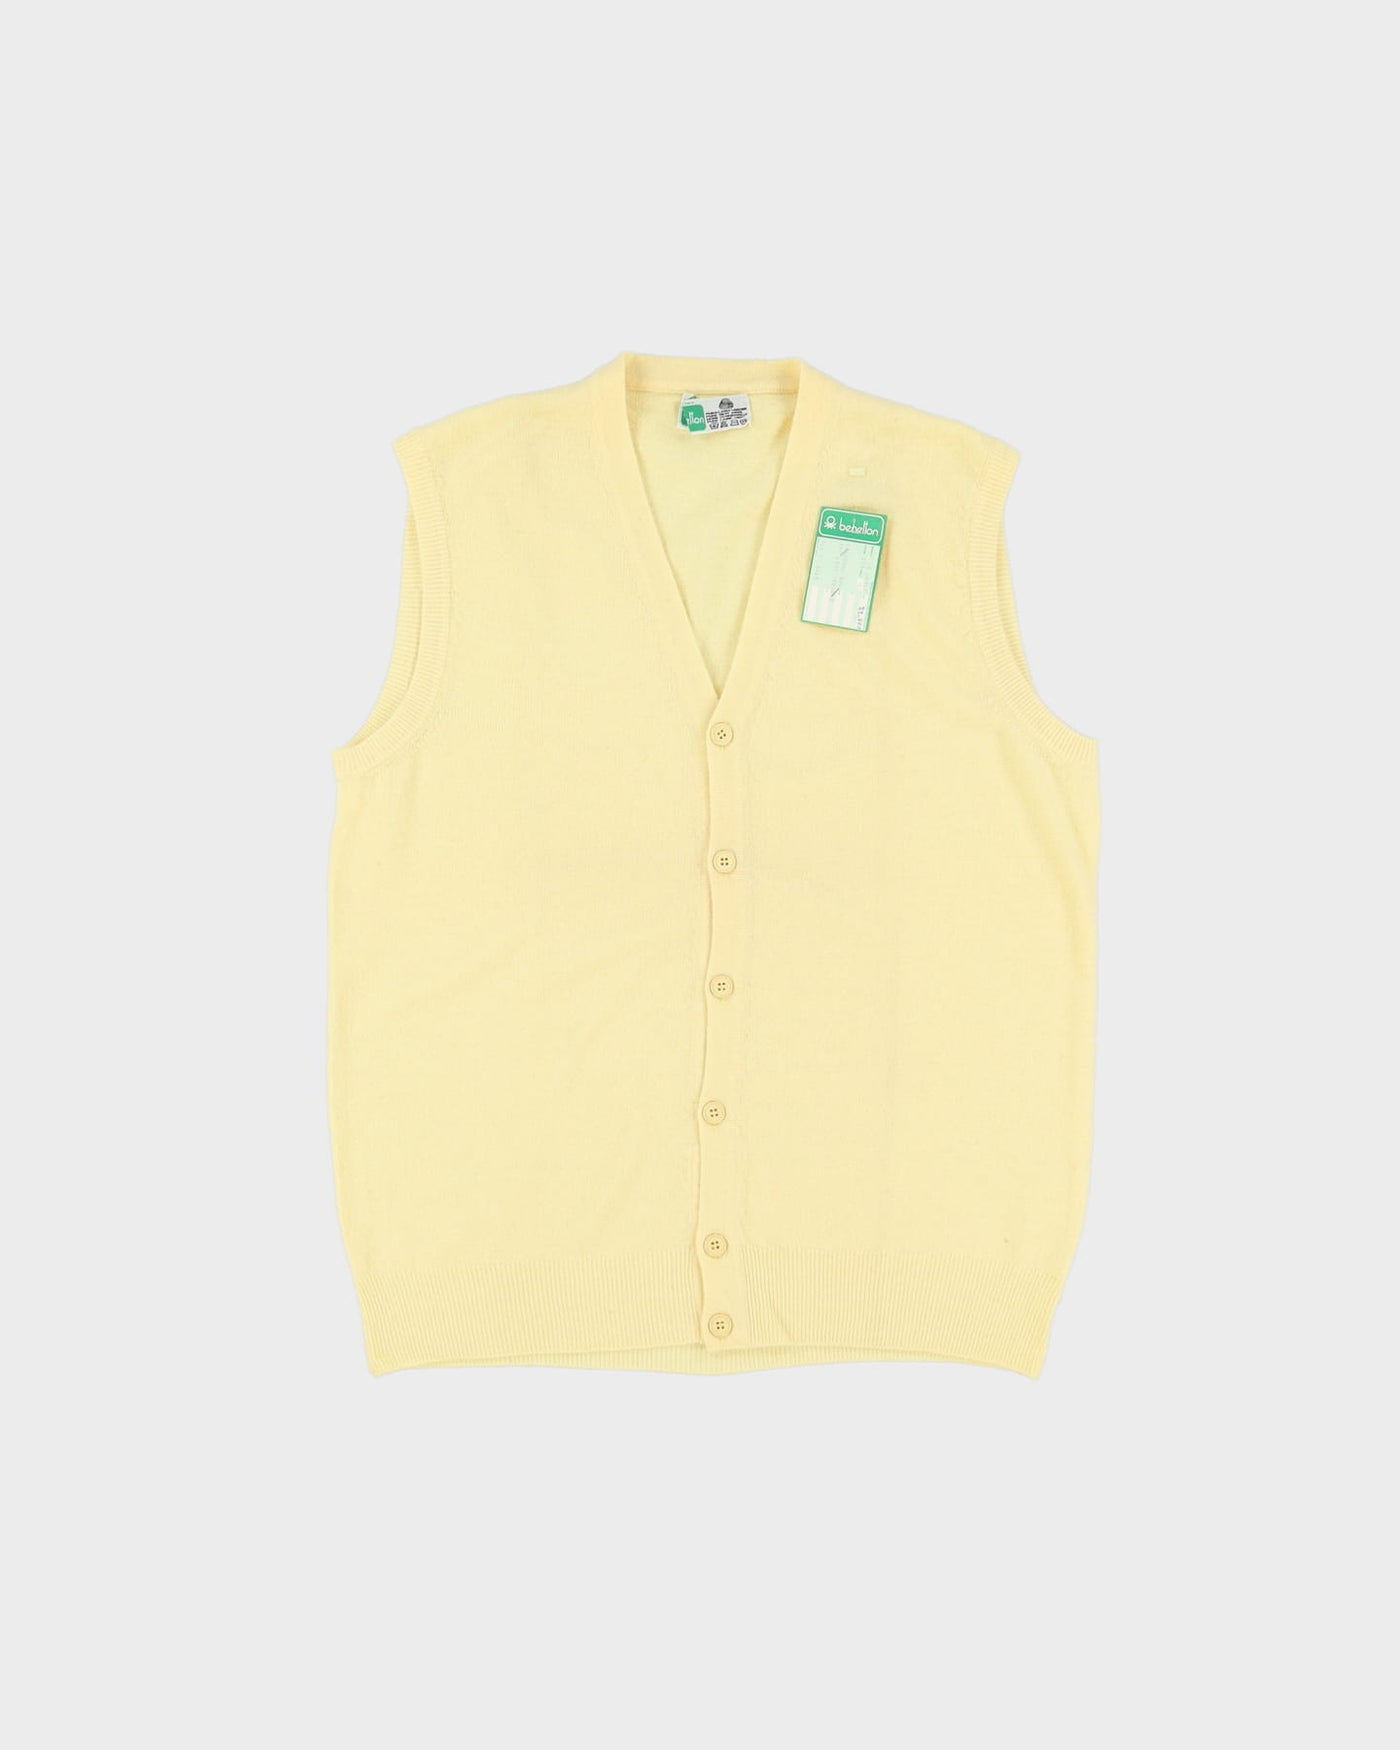 Vintage 70s Deadstock With Tags Benneton Yellow Cardigan Sweater Vest / Tank Knit - M